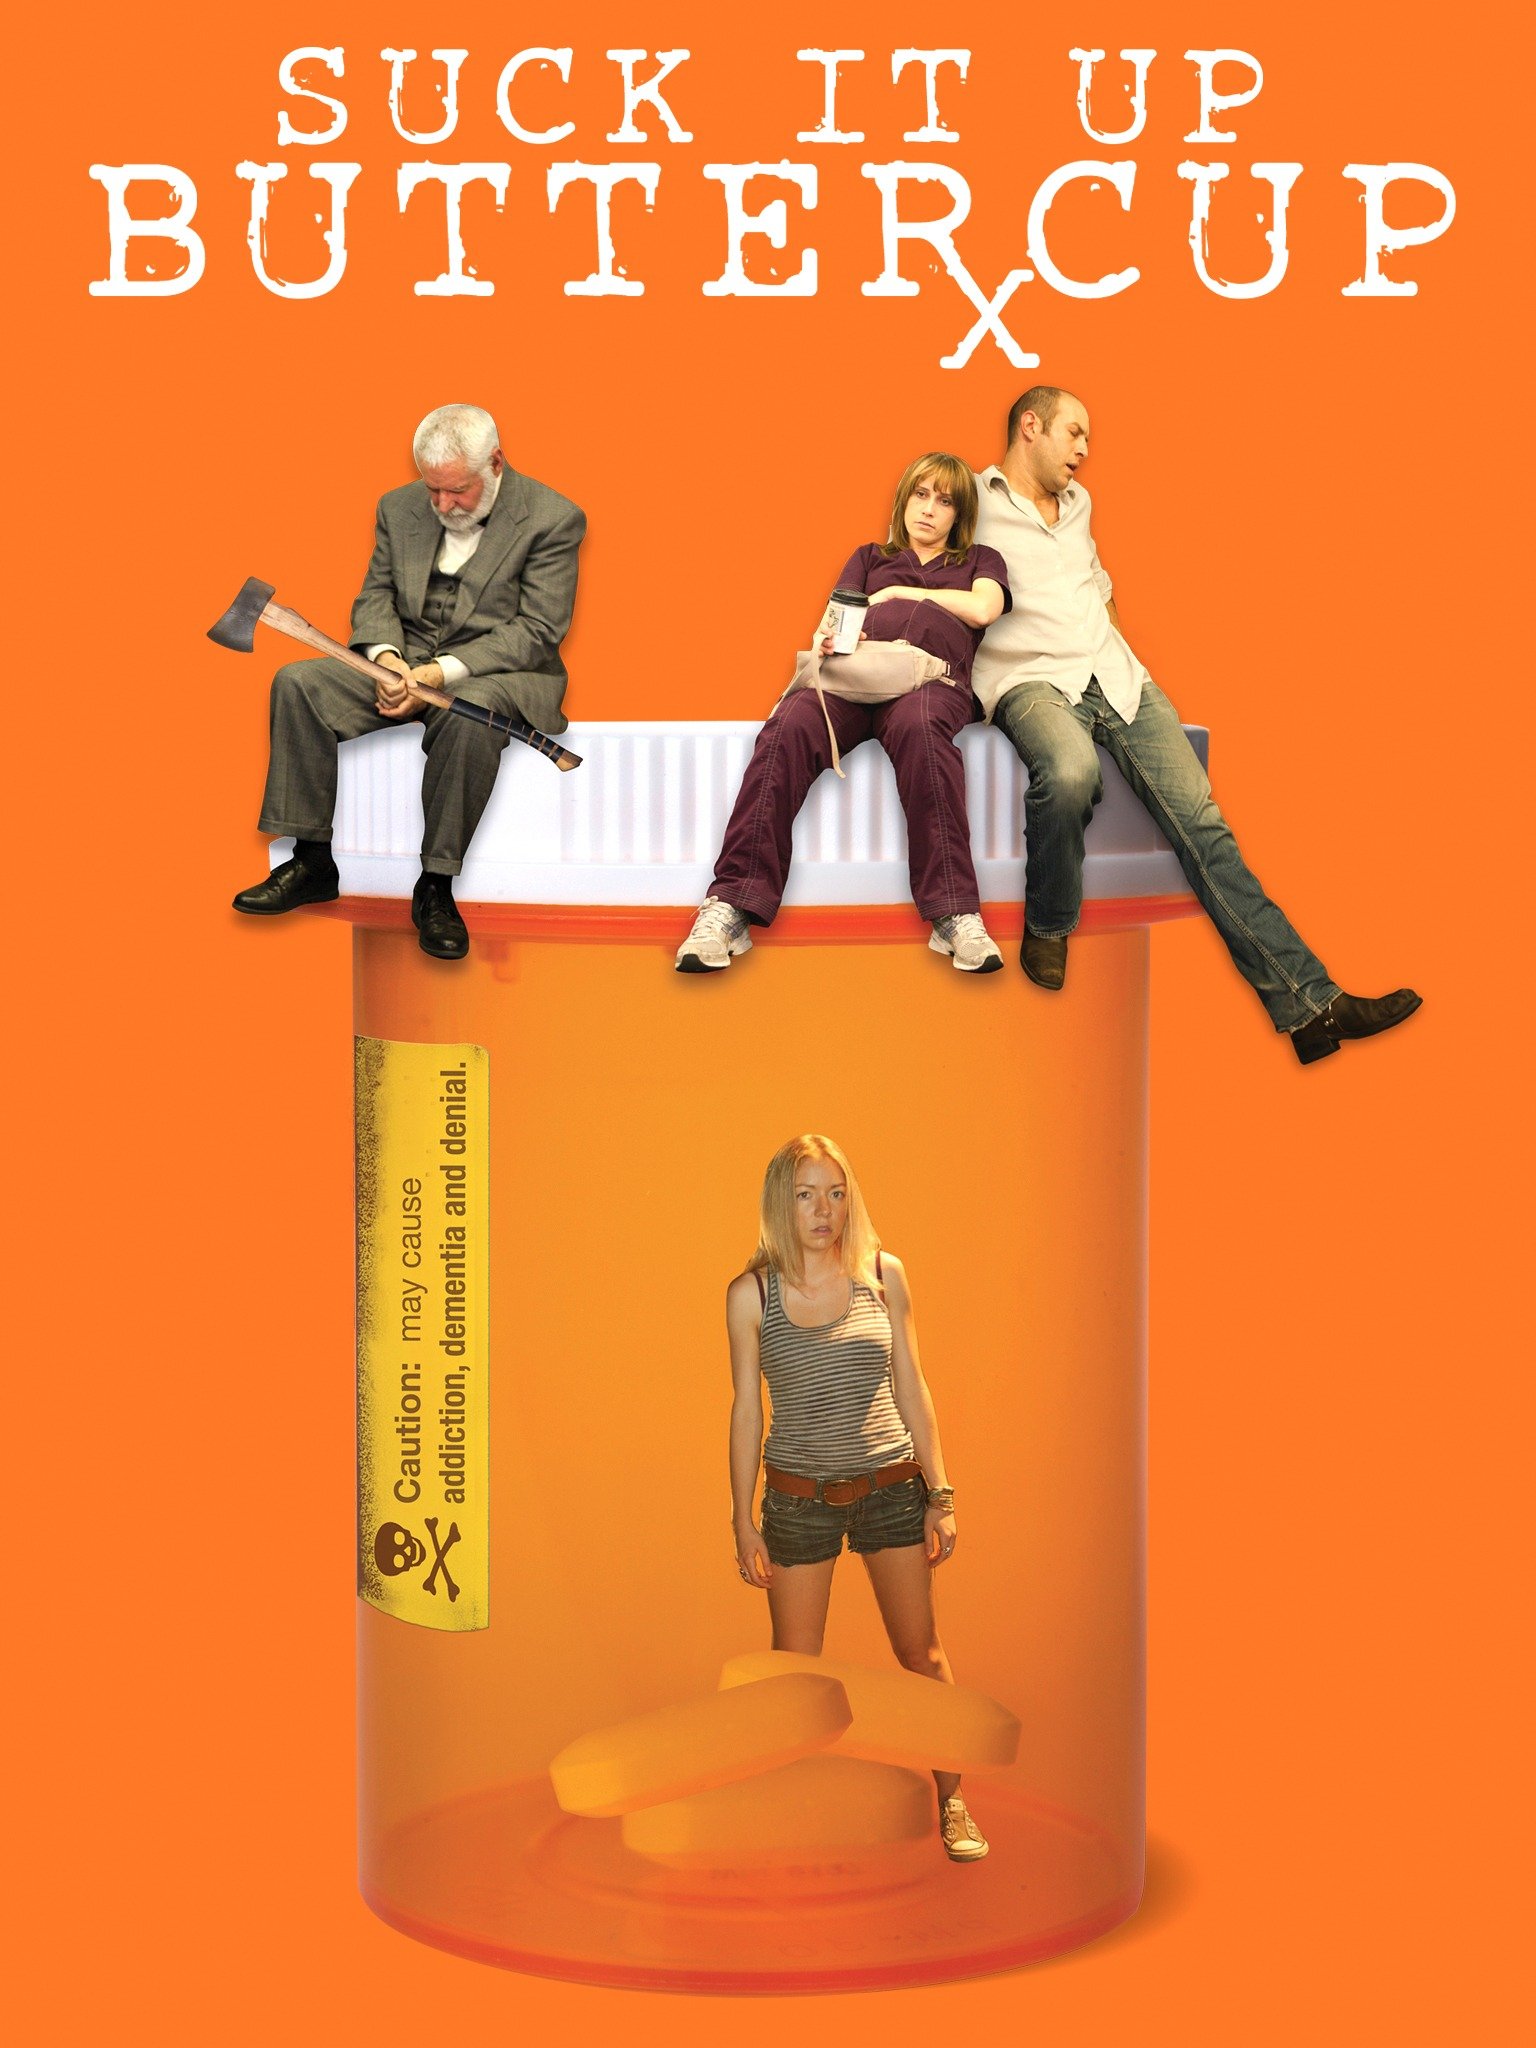 suck-it-up-buttercup-2014-rotten-tomatoes